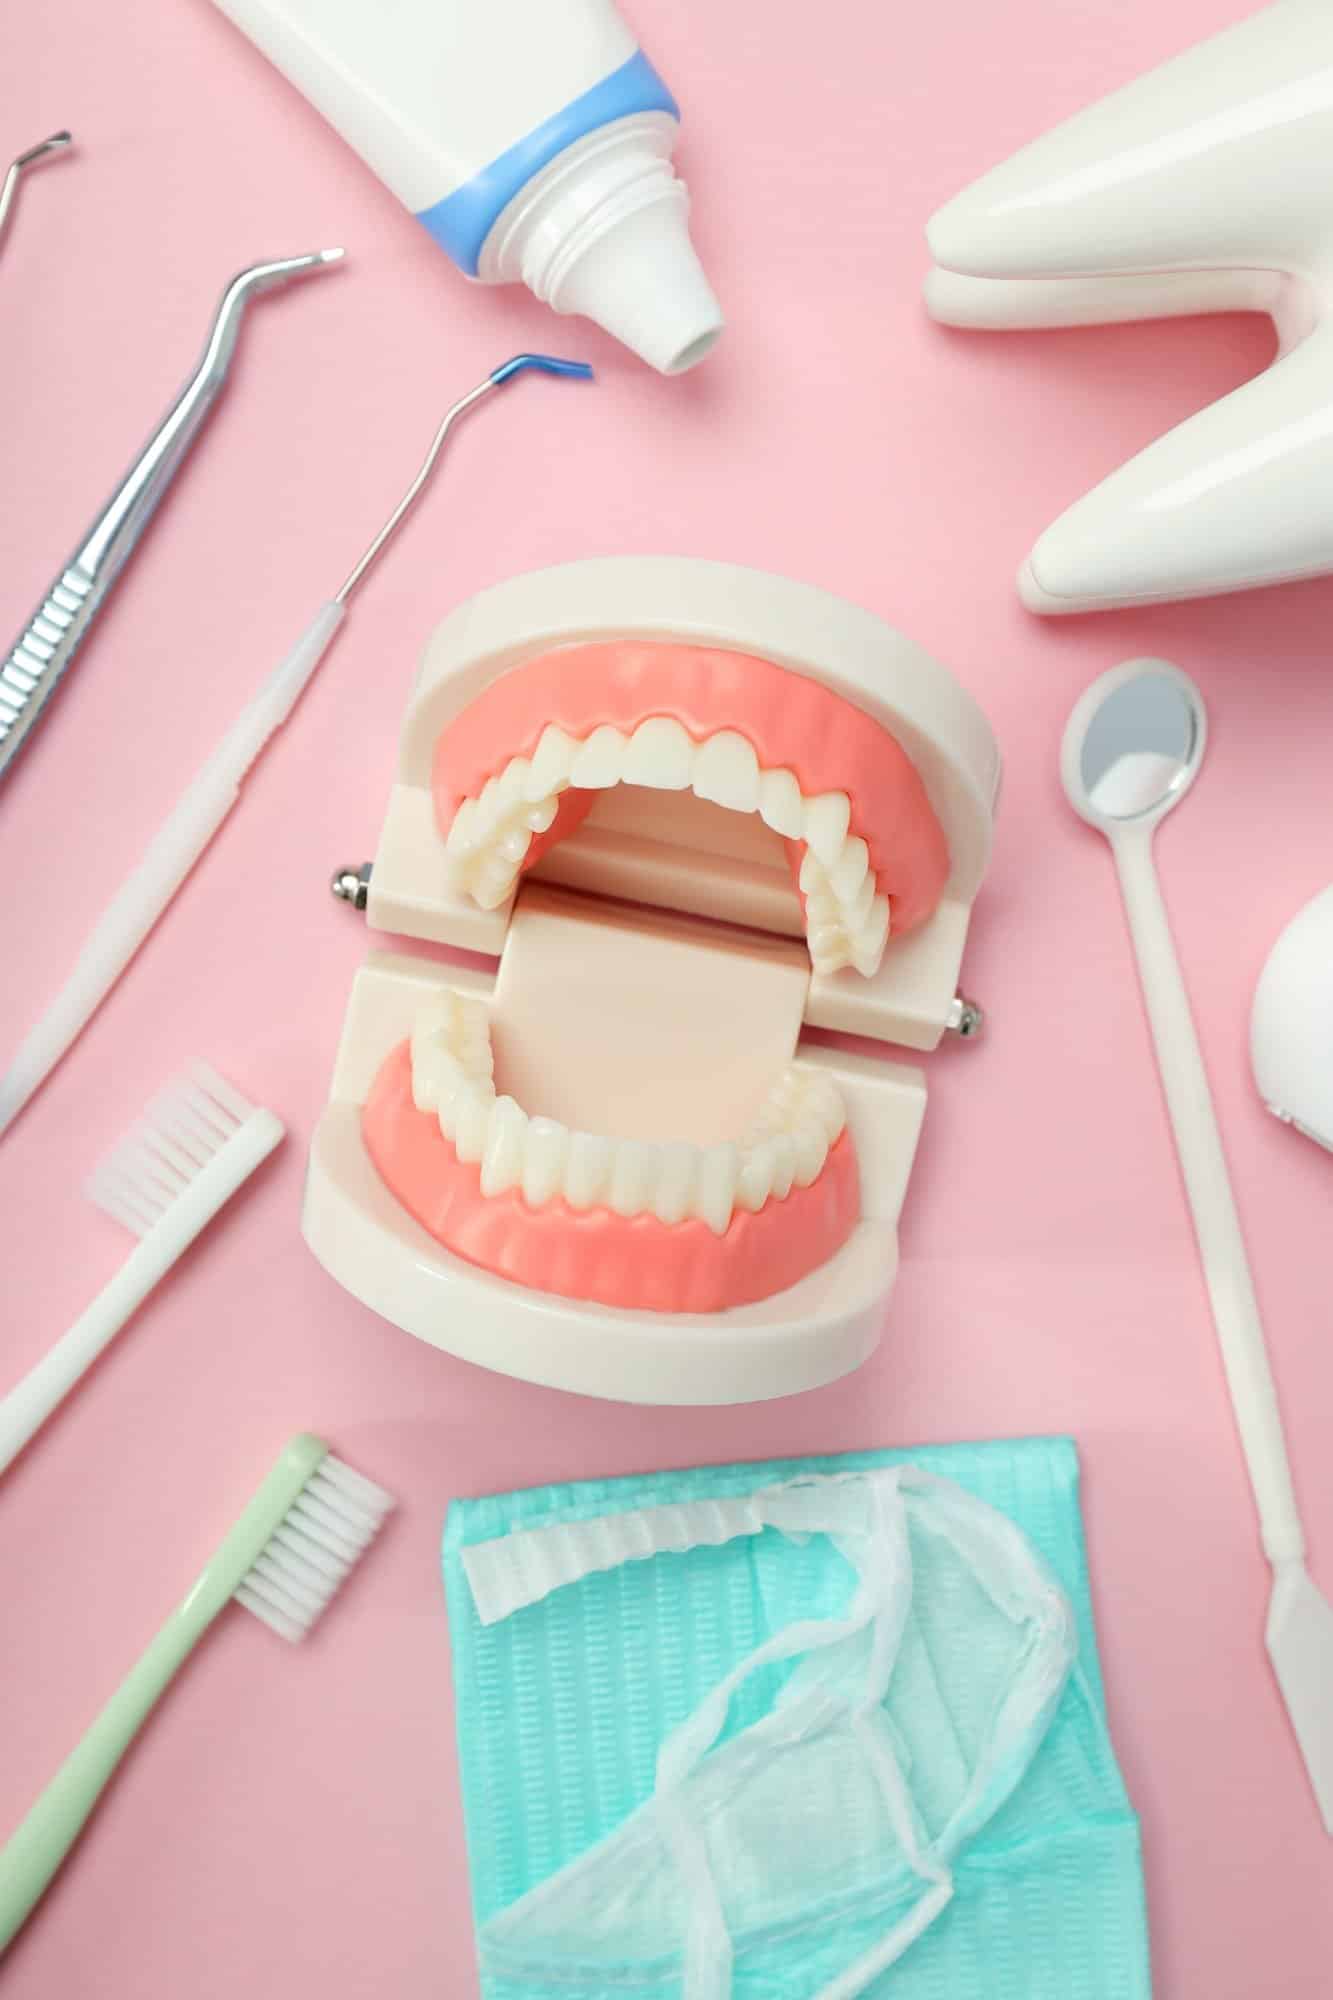 Concept of dental care, tooth care, top view